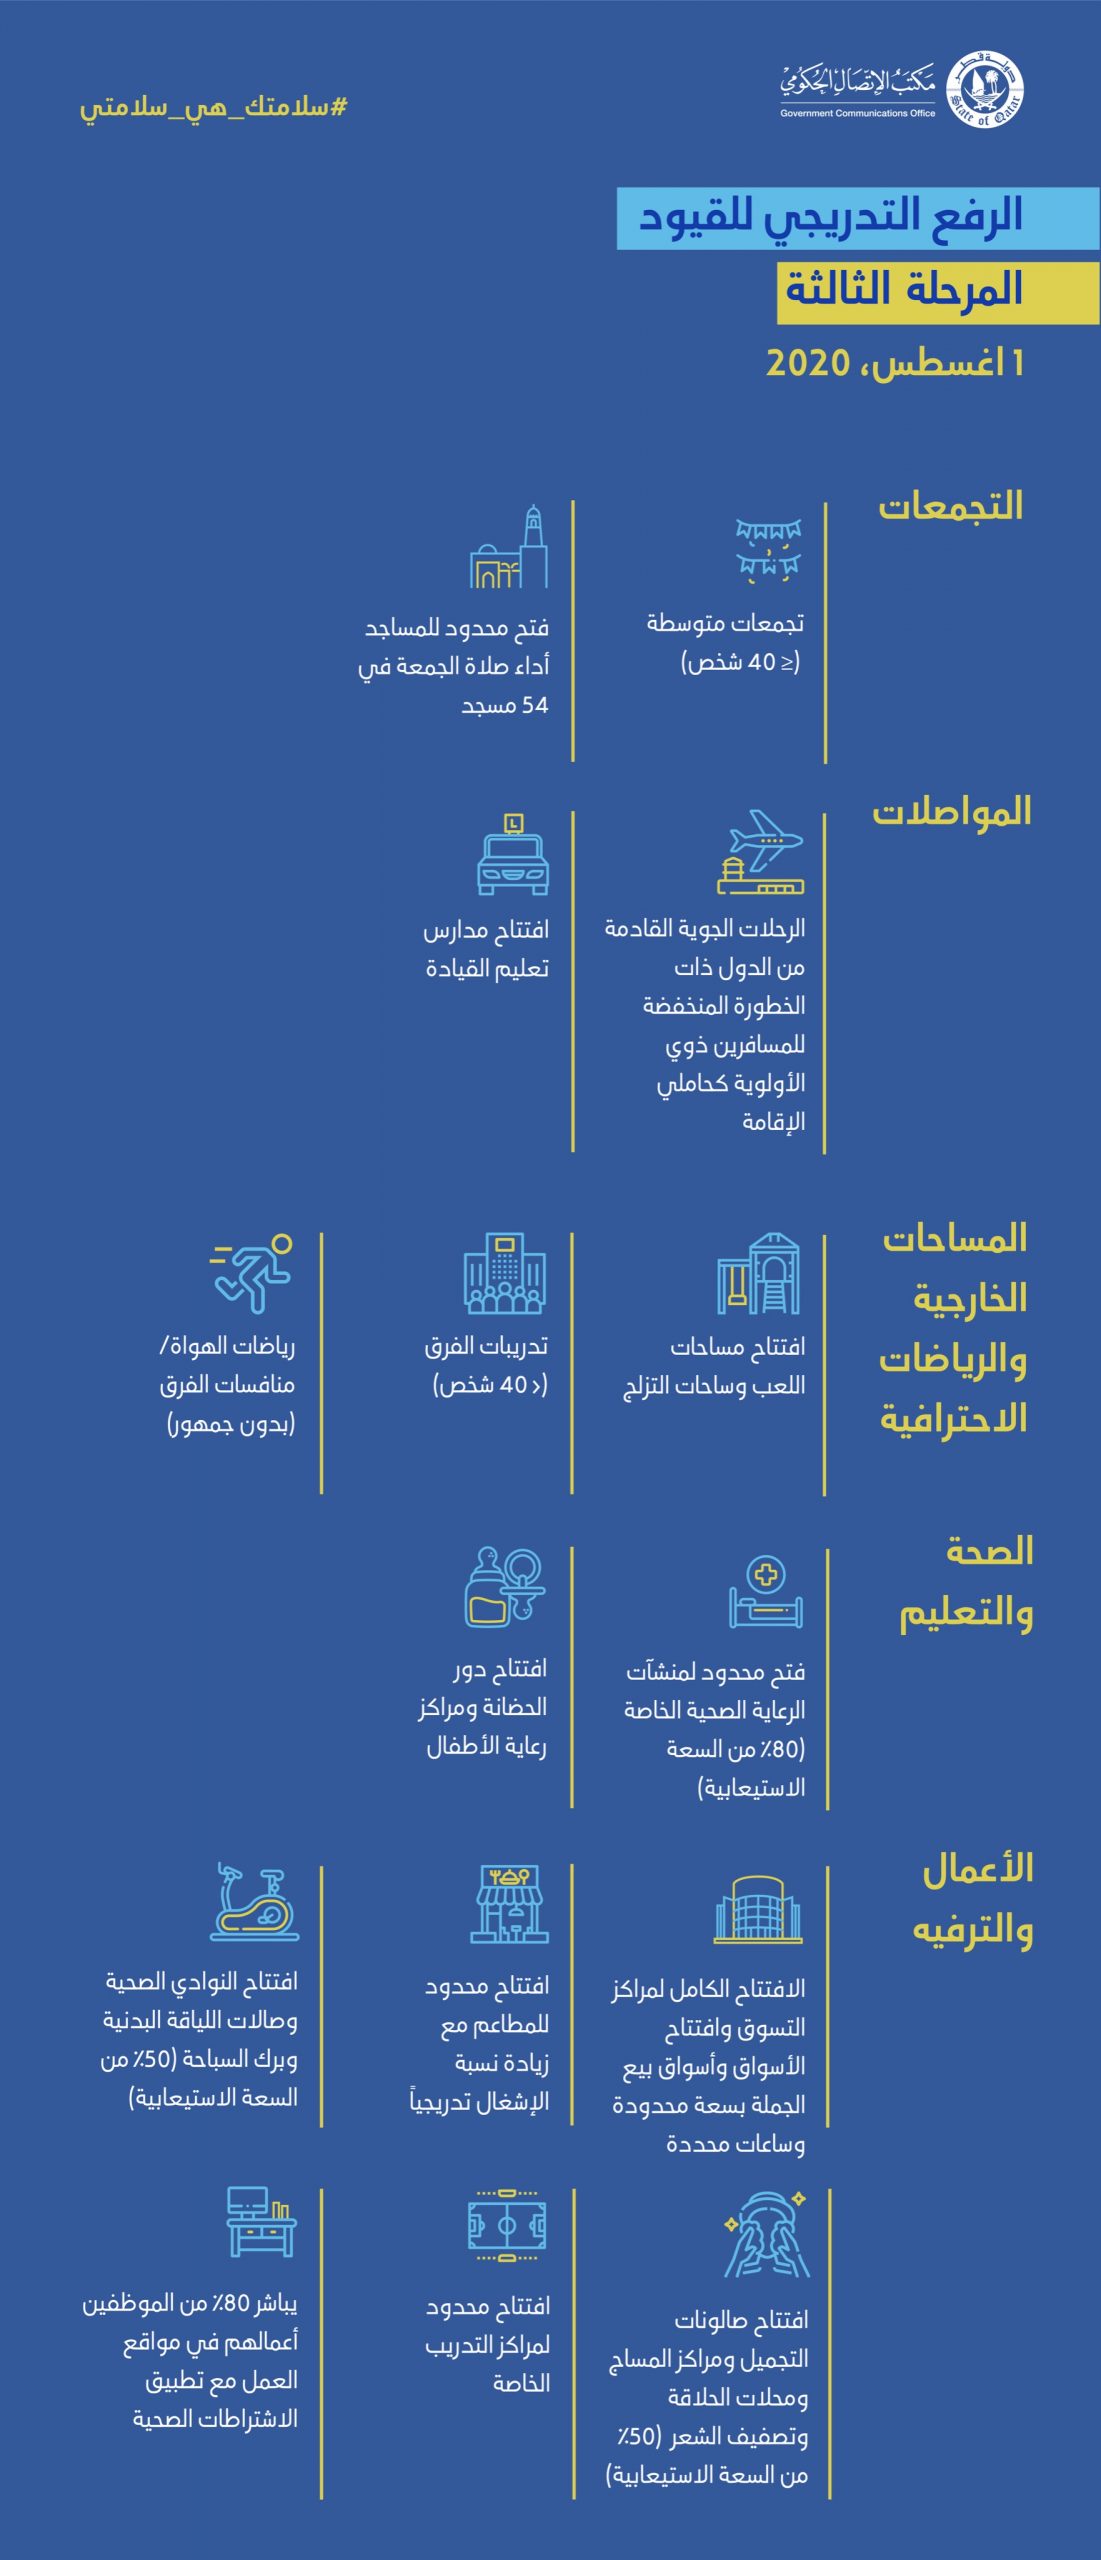 Qatar’s plans to ease COVID-19 restrictions in four phases beginning 15 June